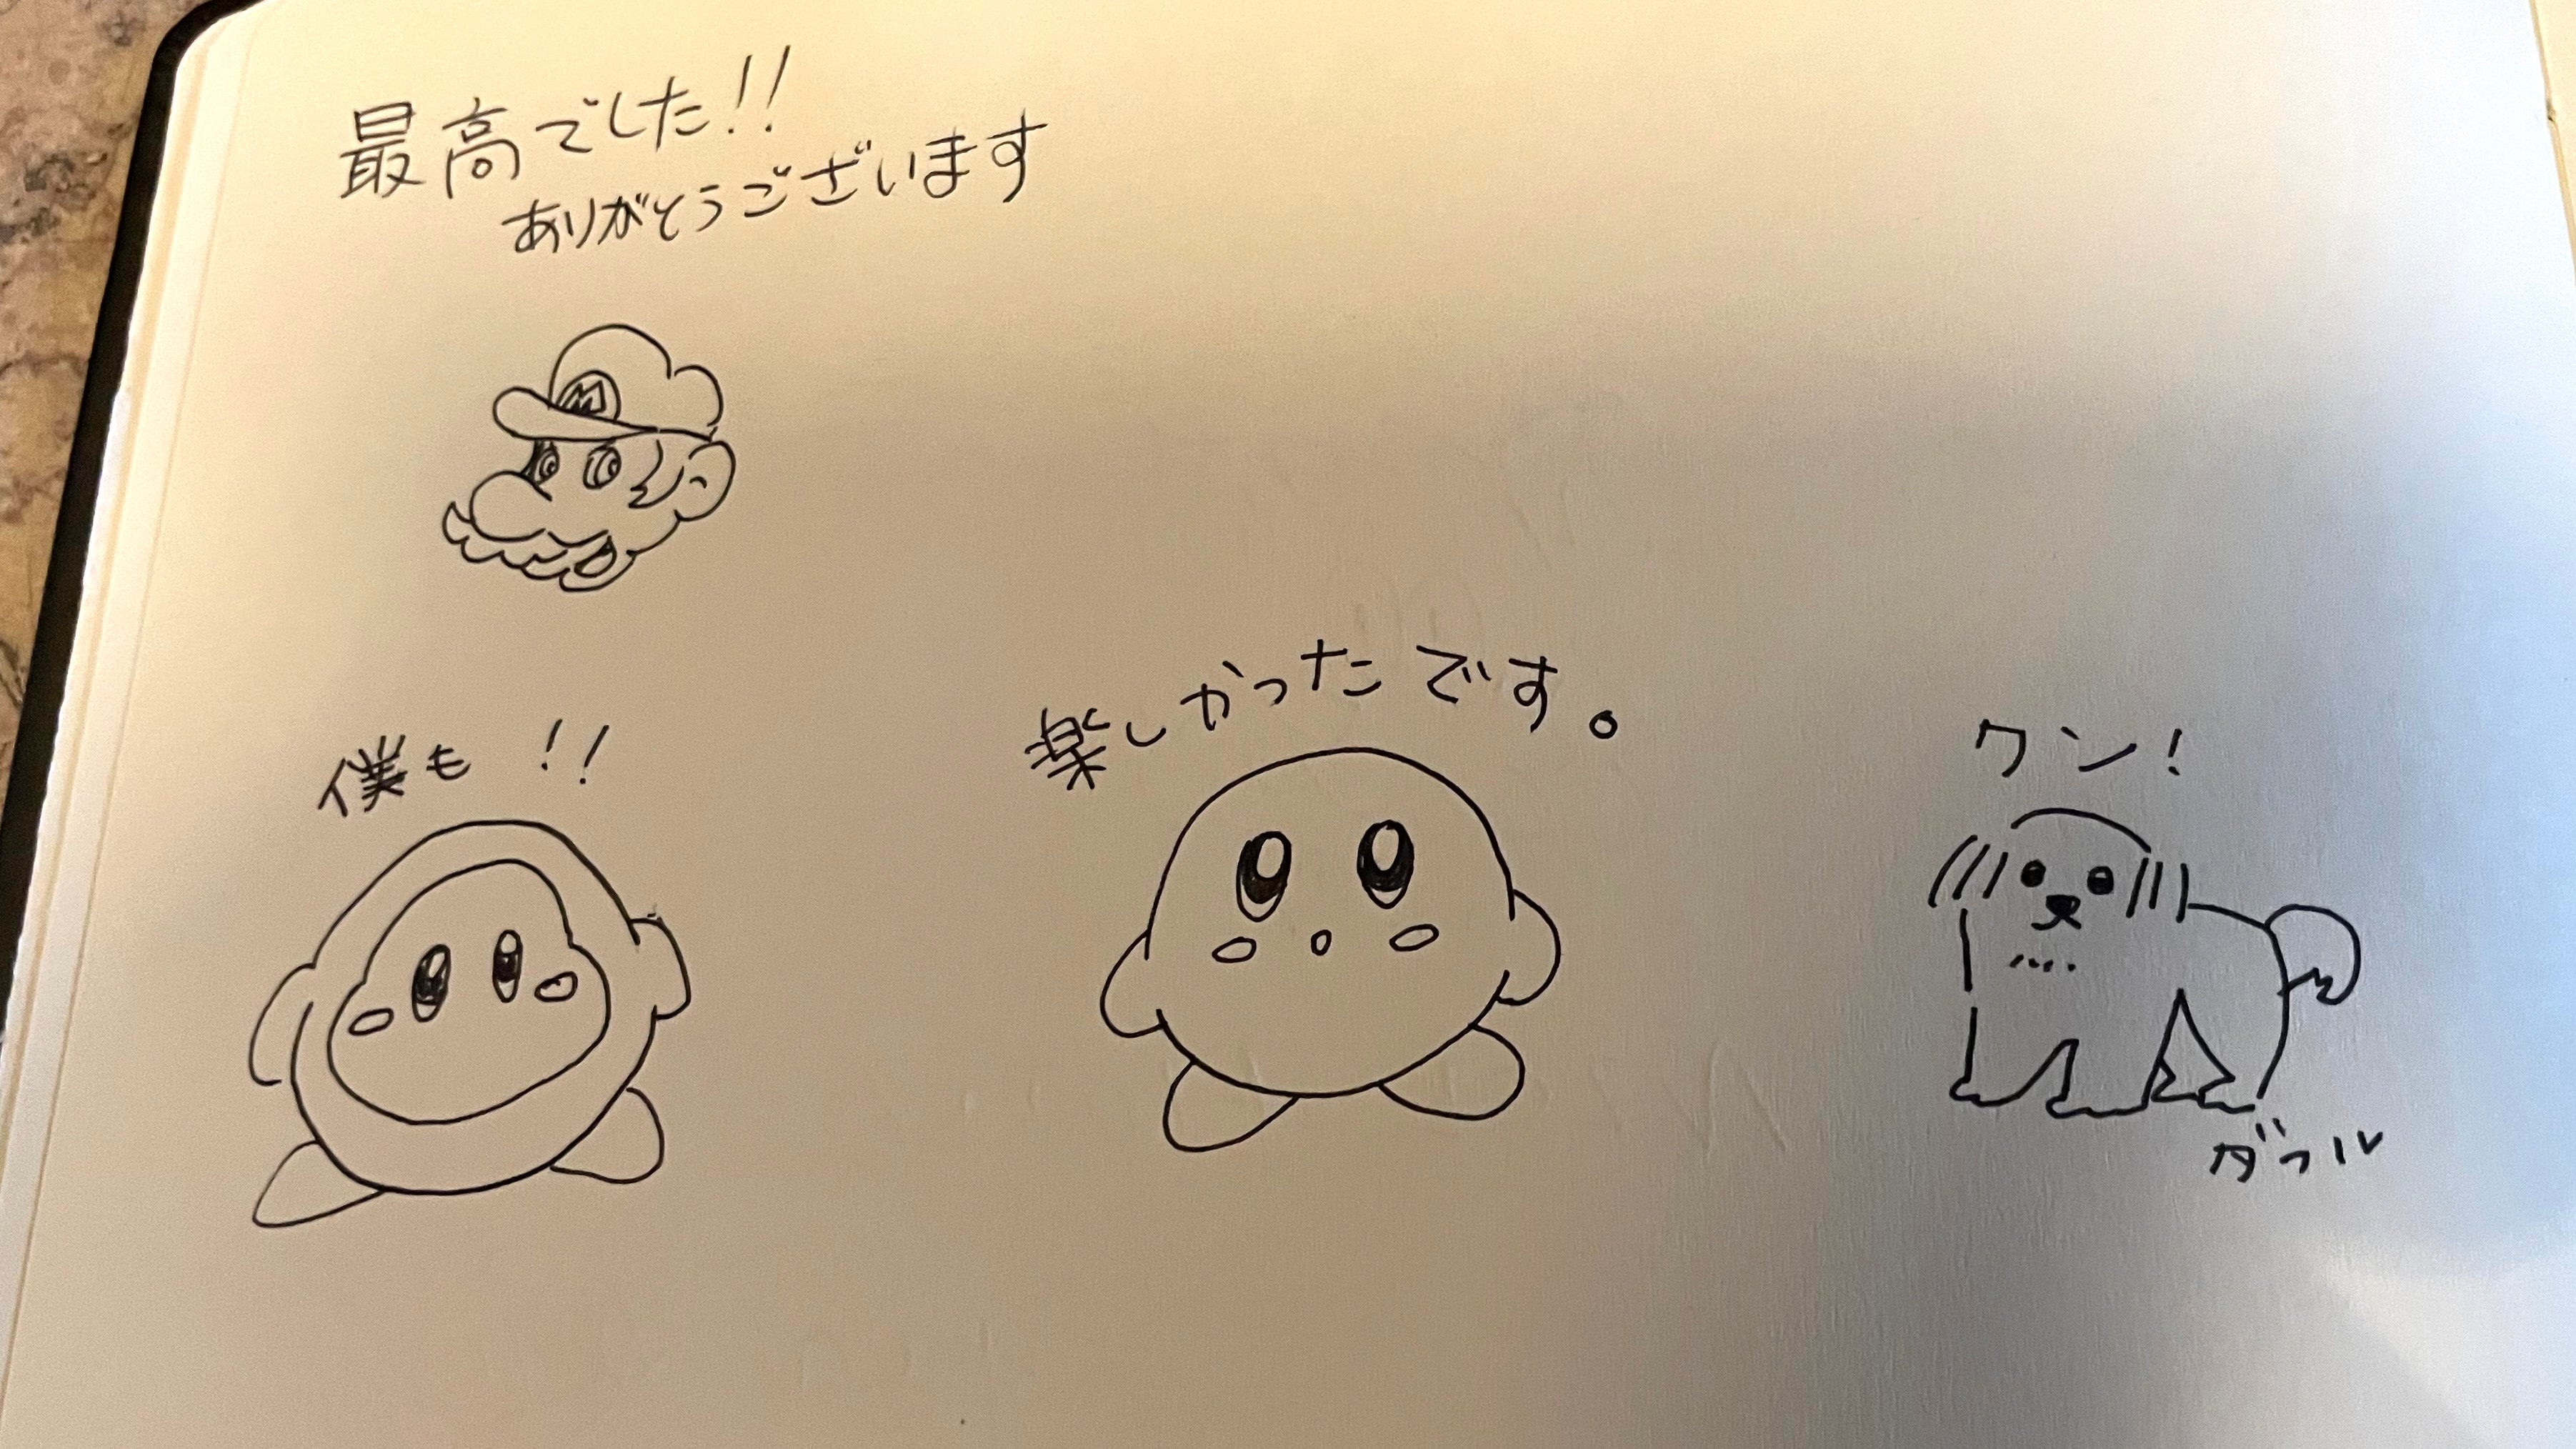 A hotel guestbook but one with Nintendo characters Mario and Kirby, and Japanese writing annotating them.